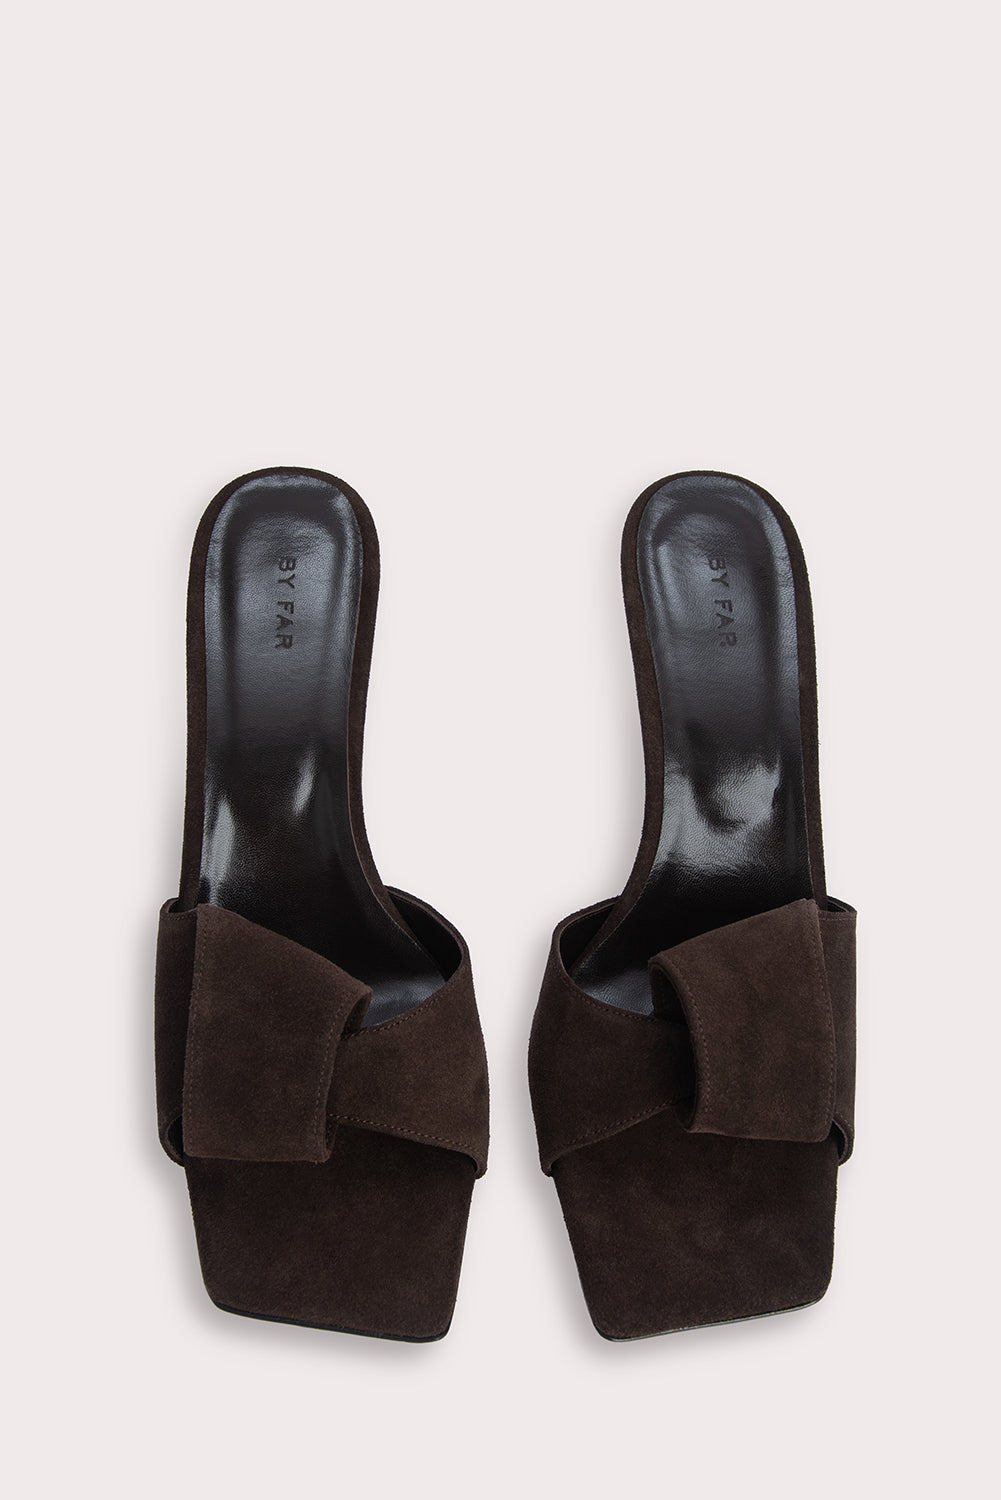 Hawn Bear Suede Leather